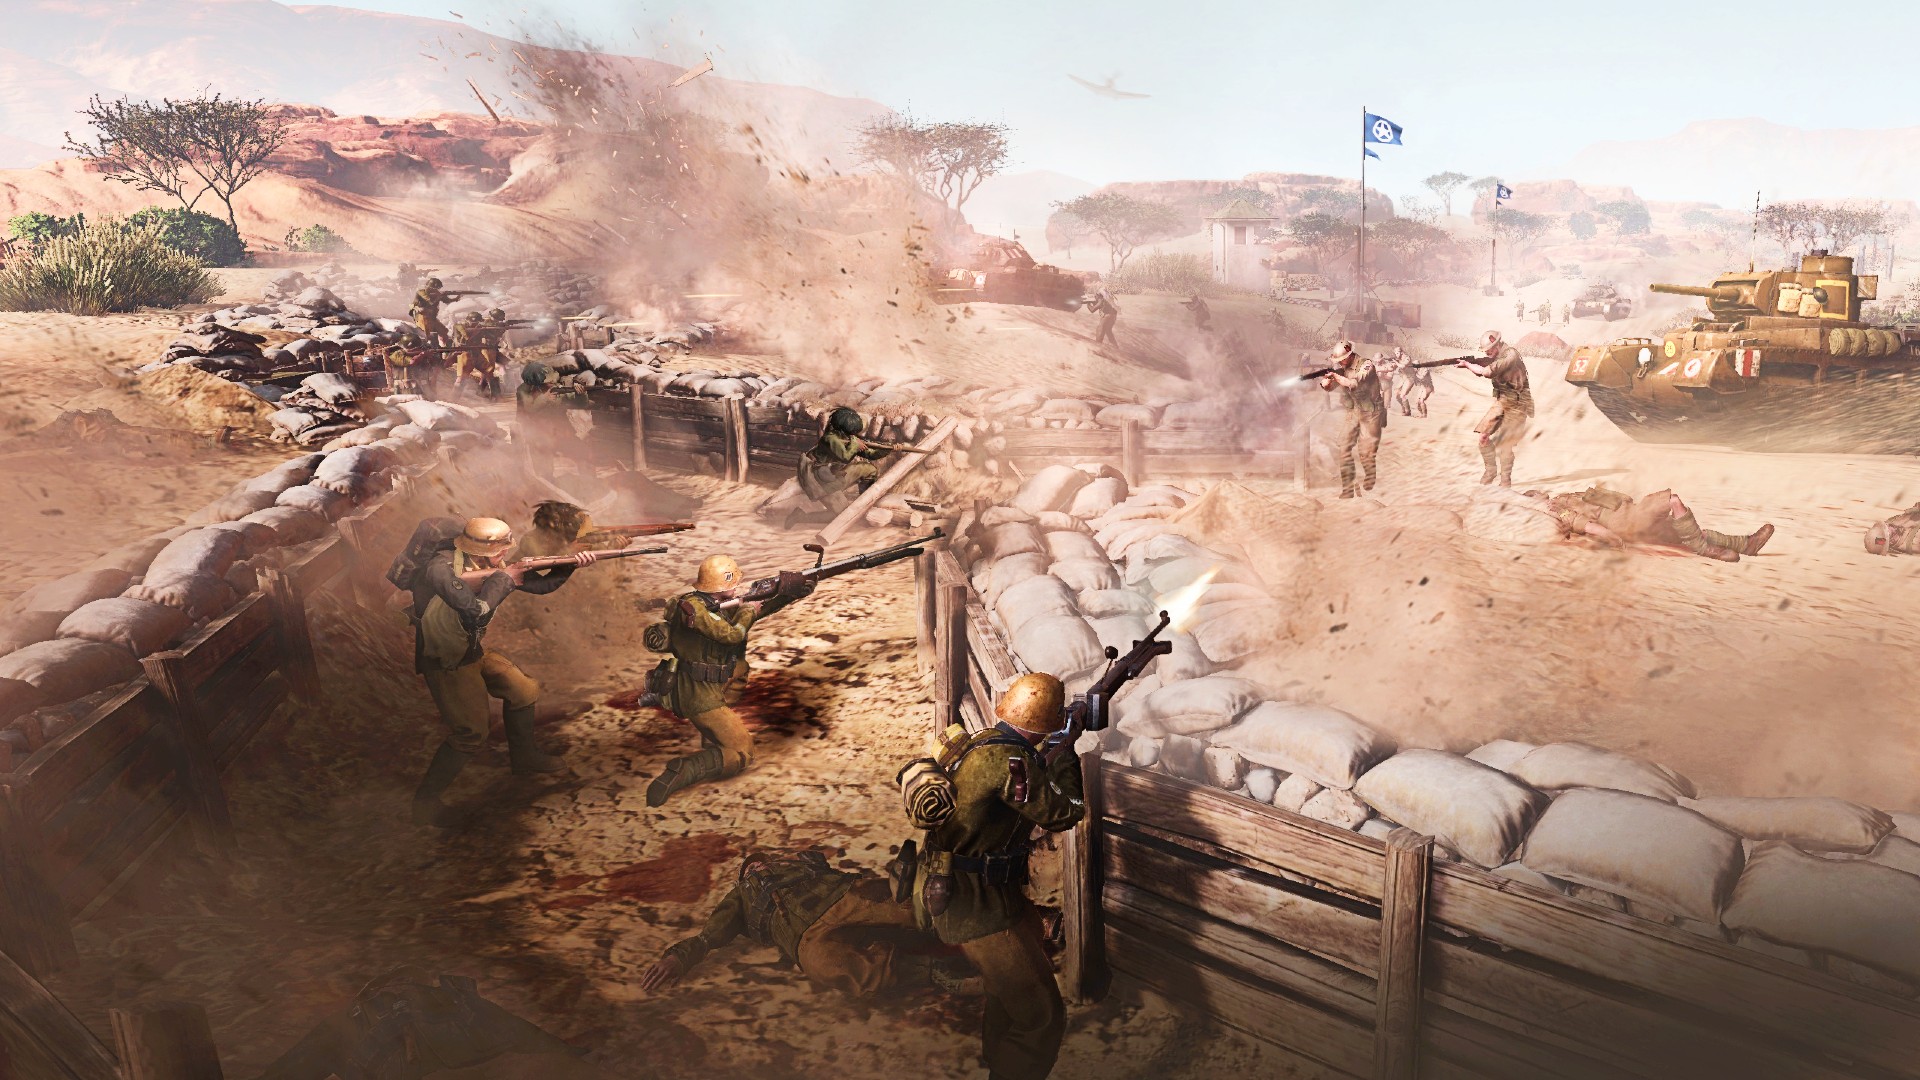 WW2-era troops fight in trenches in North Africa in Company of Heroes 3